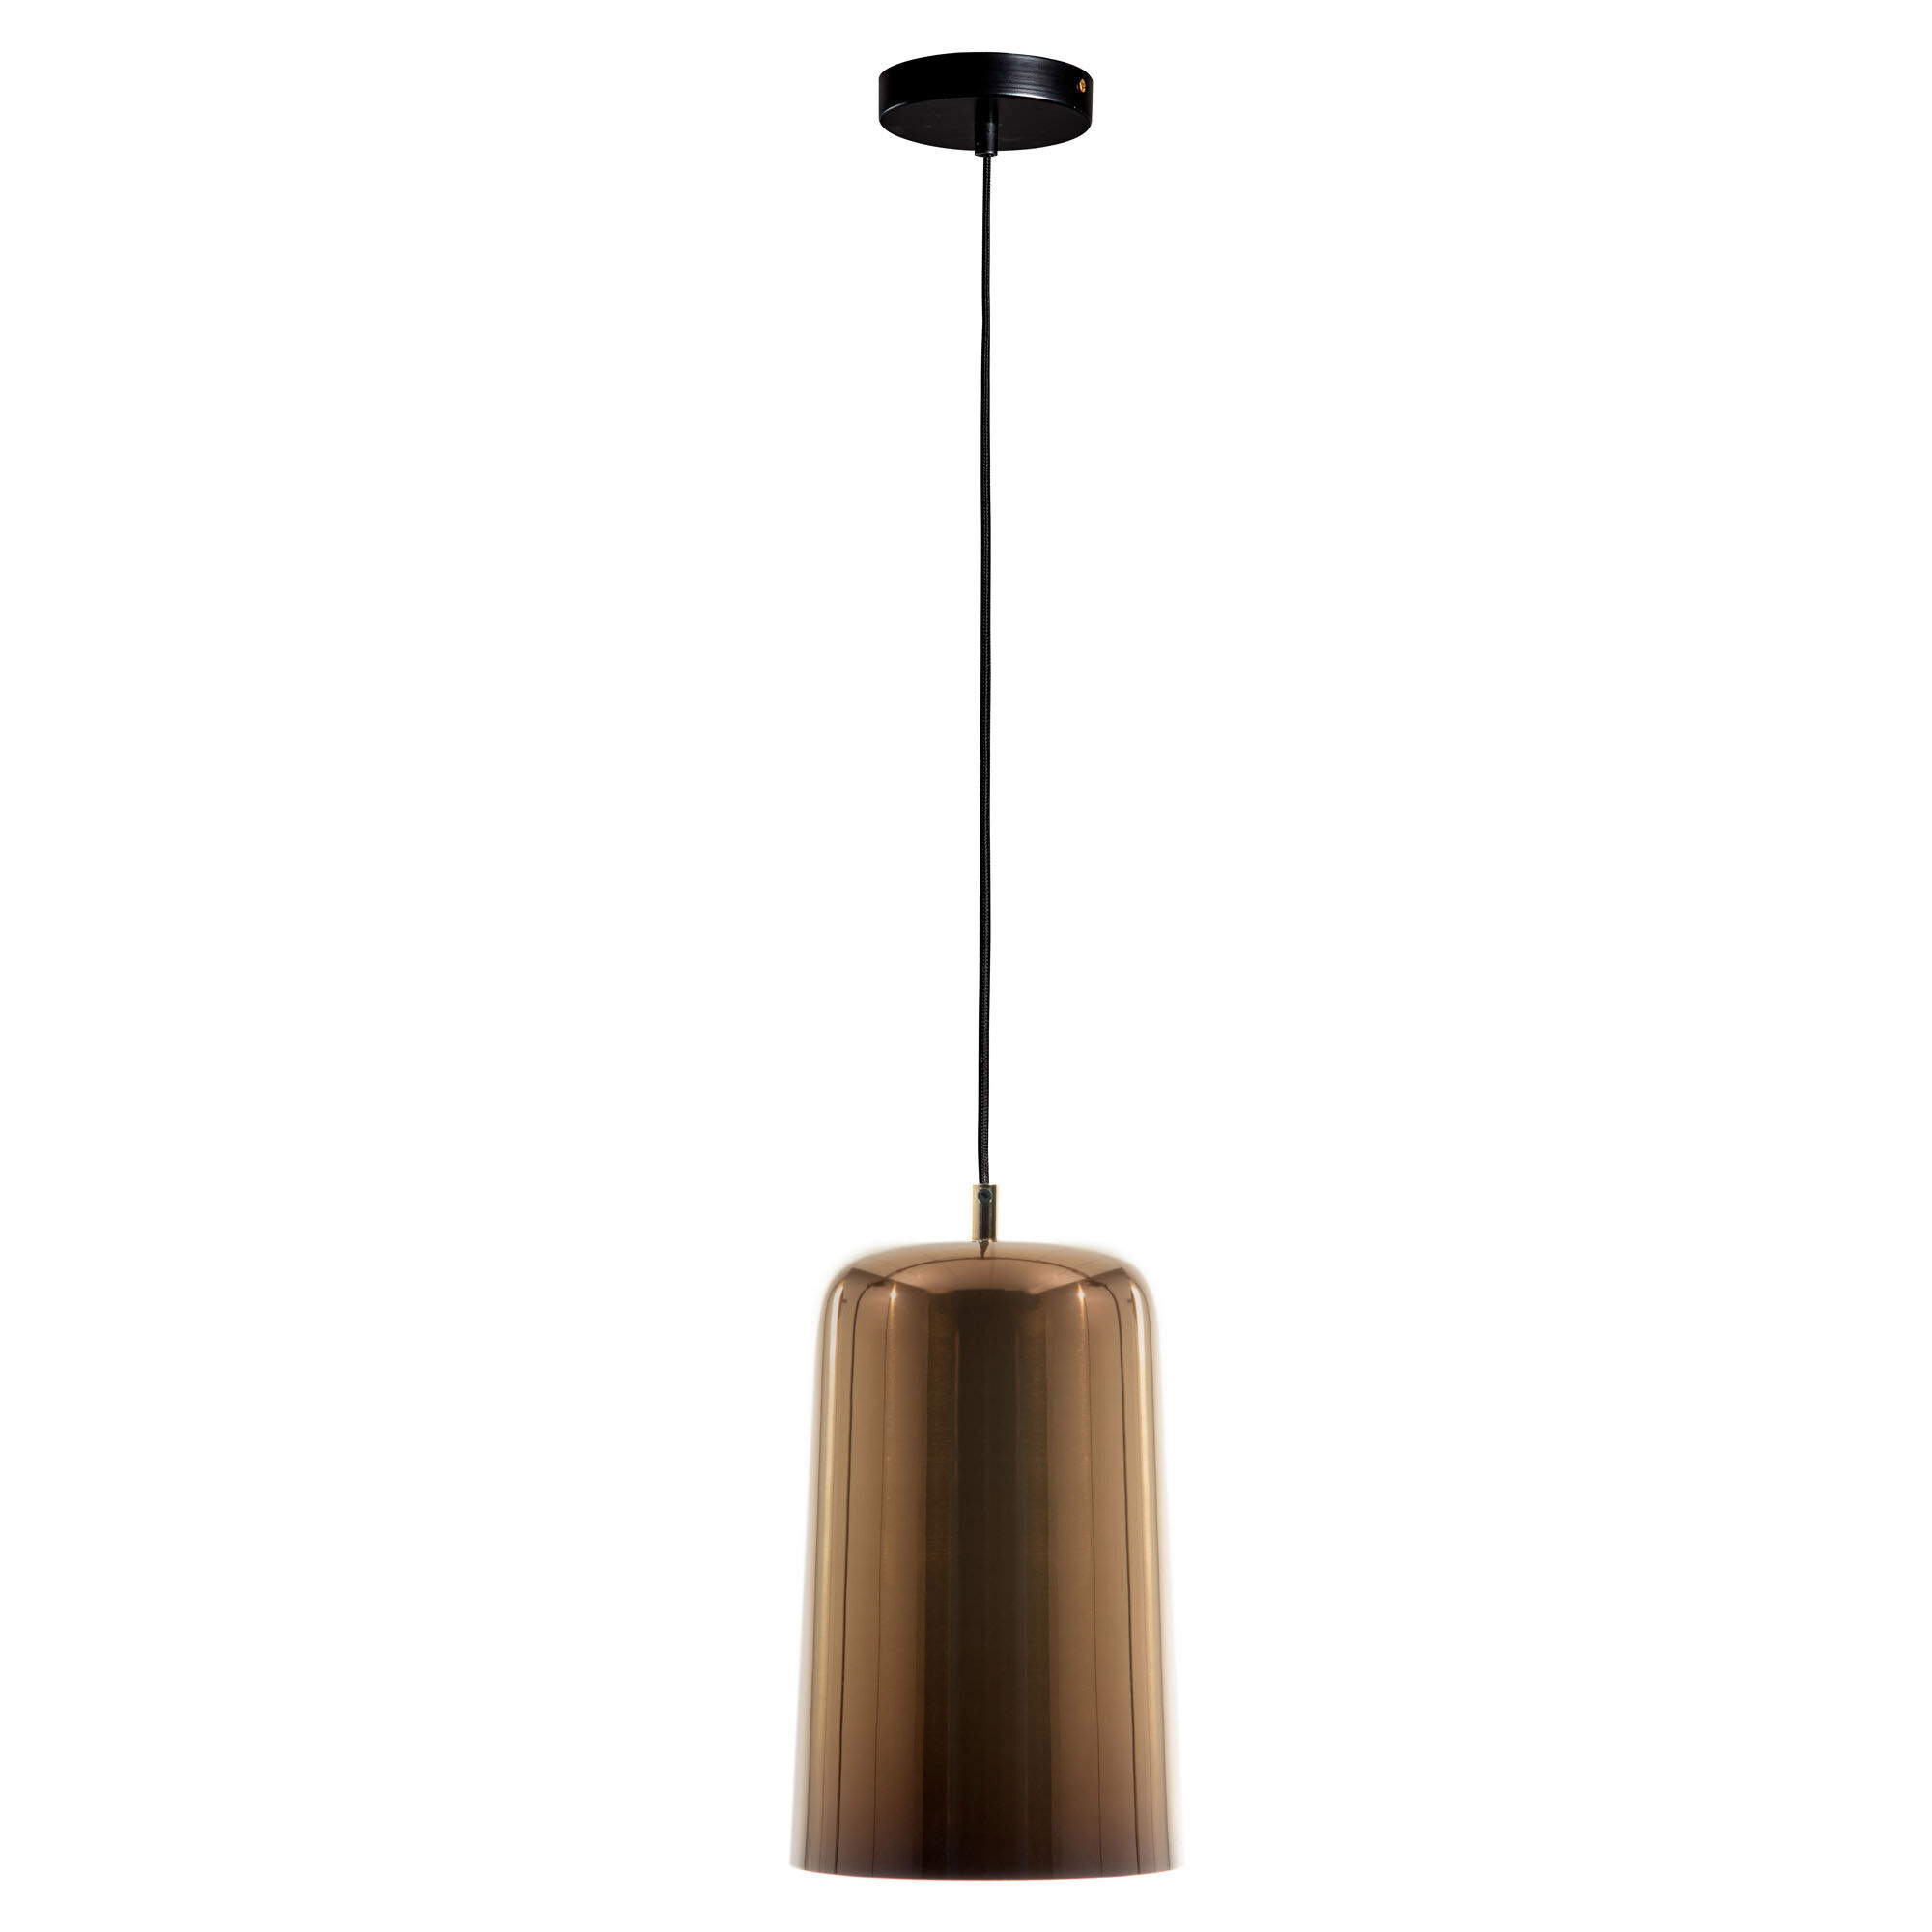 Kave Home Anina ceiling lamp